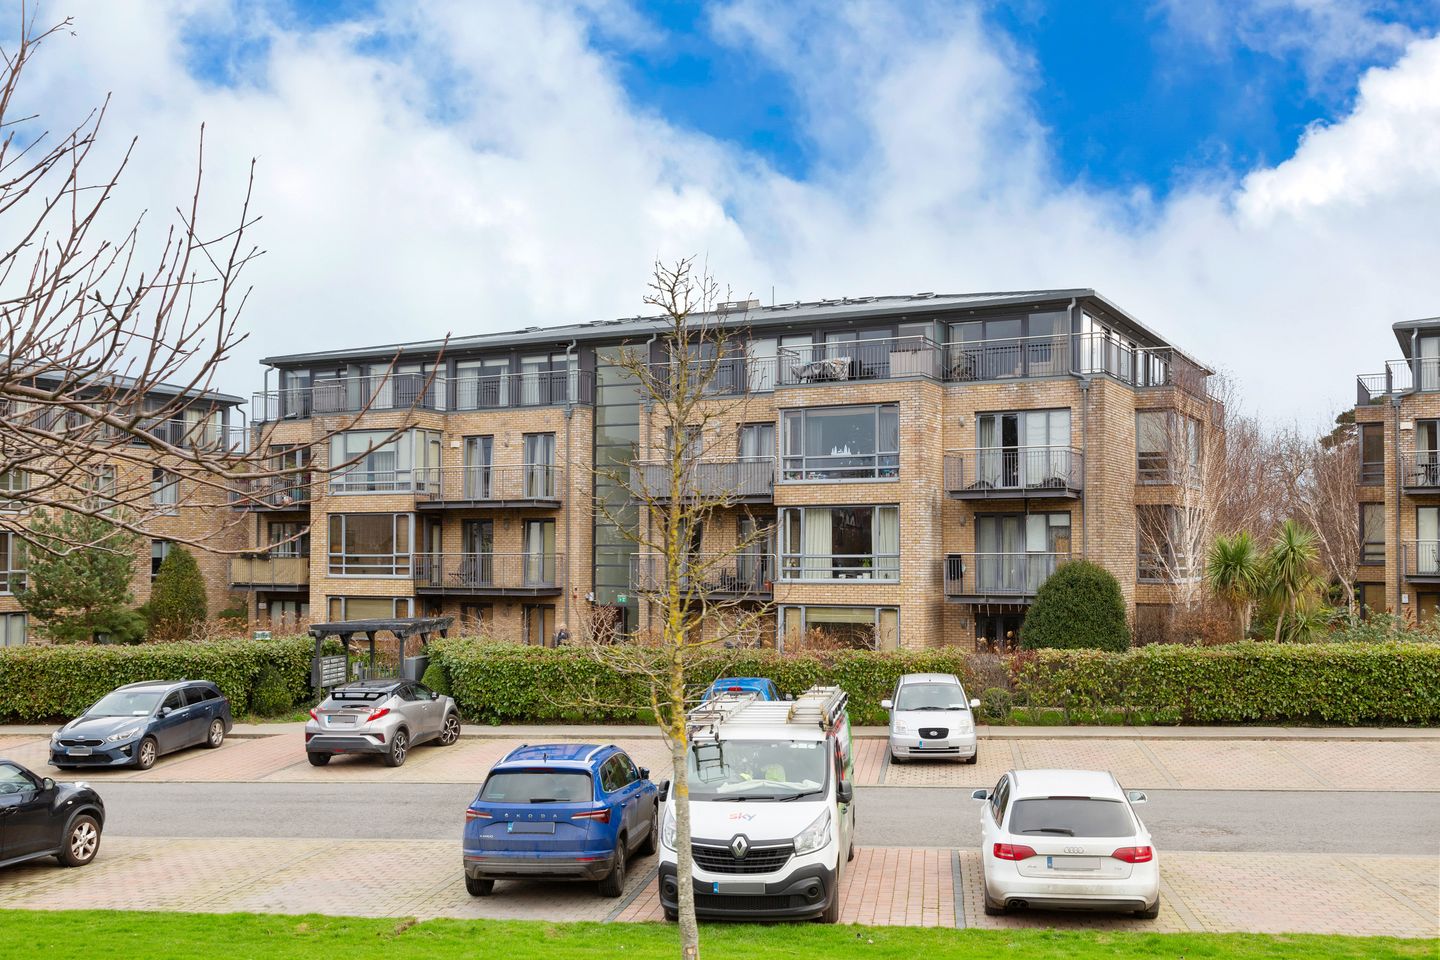 Apartment 54, Priory Court, Delgany, Co. Wicklow, A63HN77